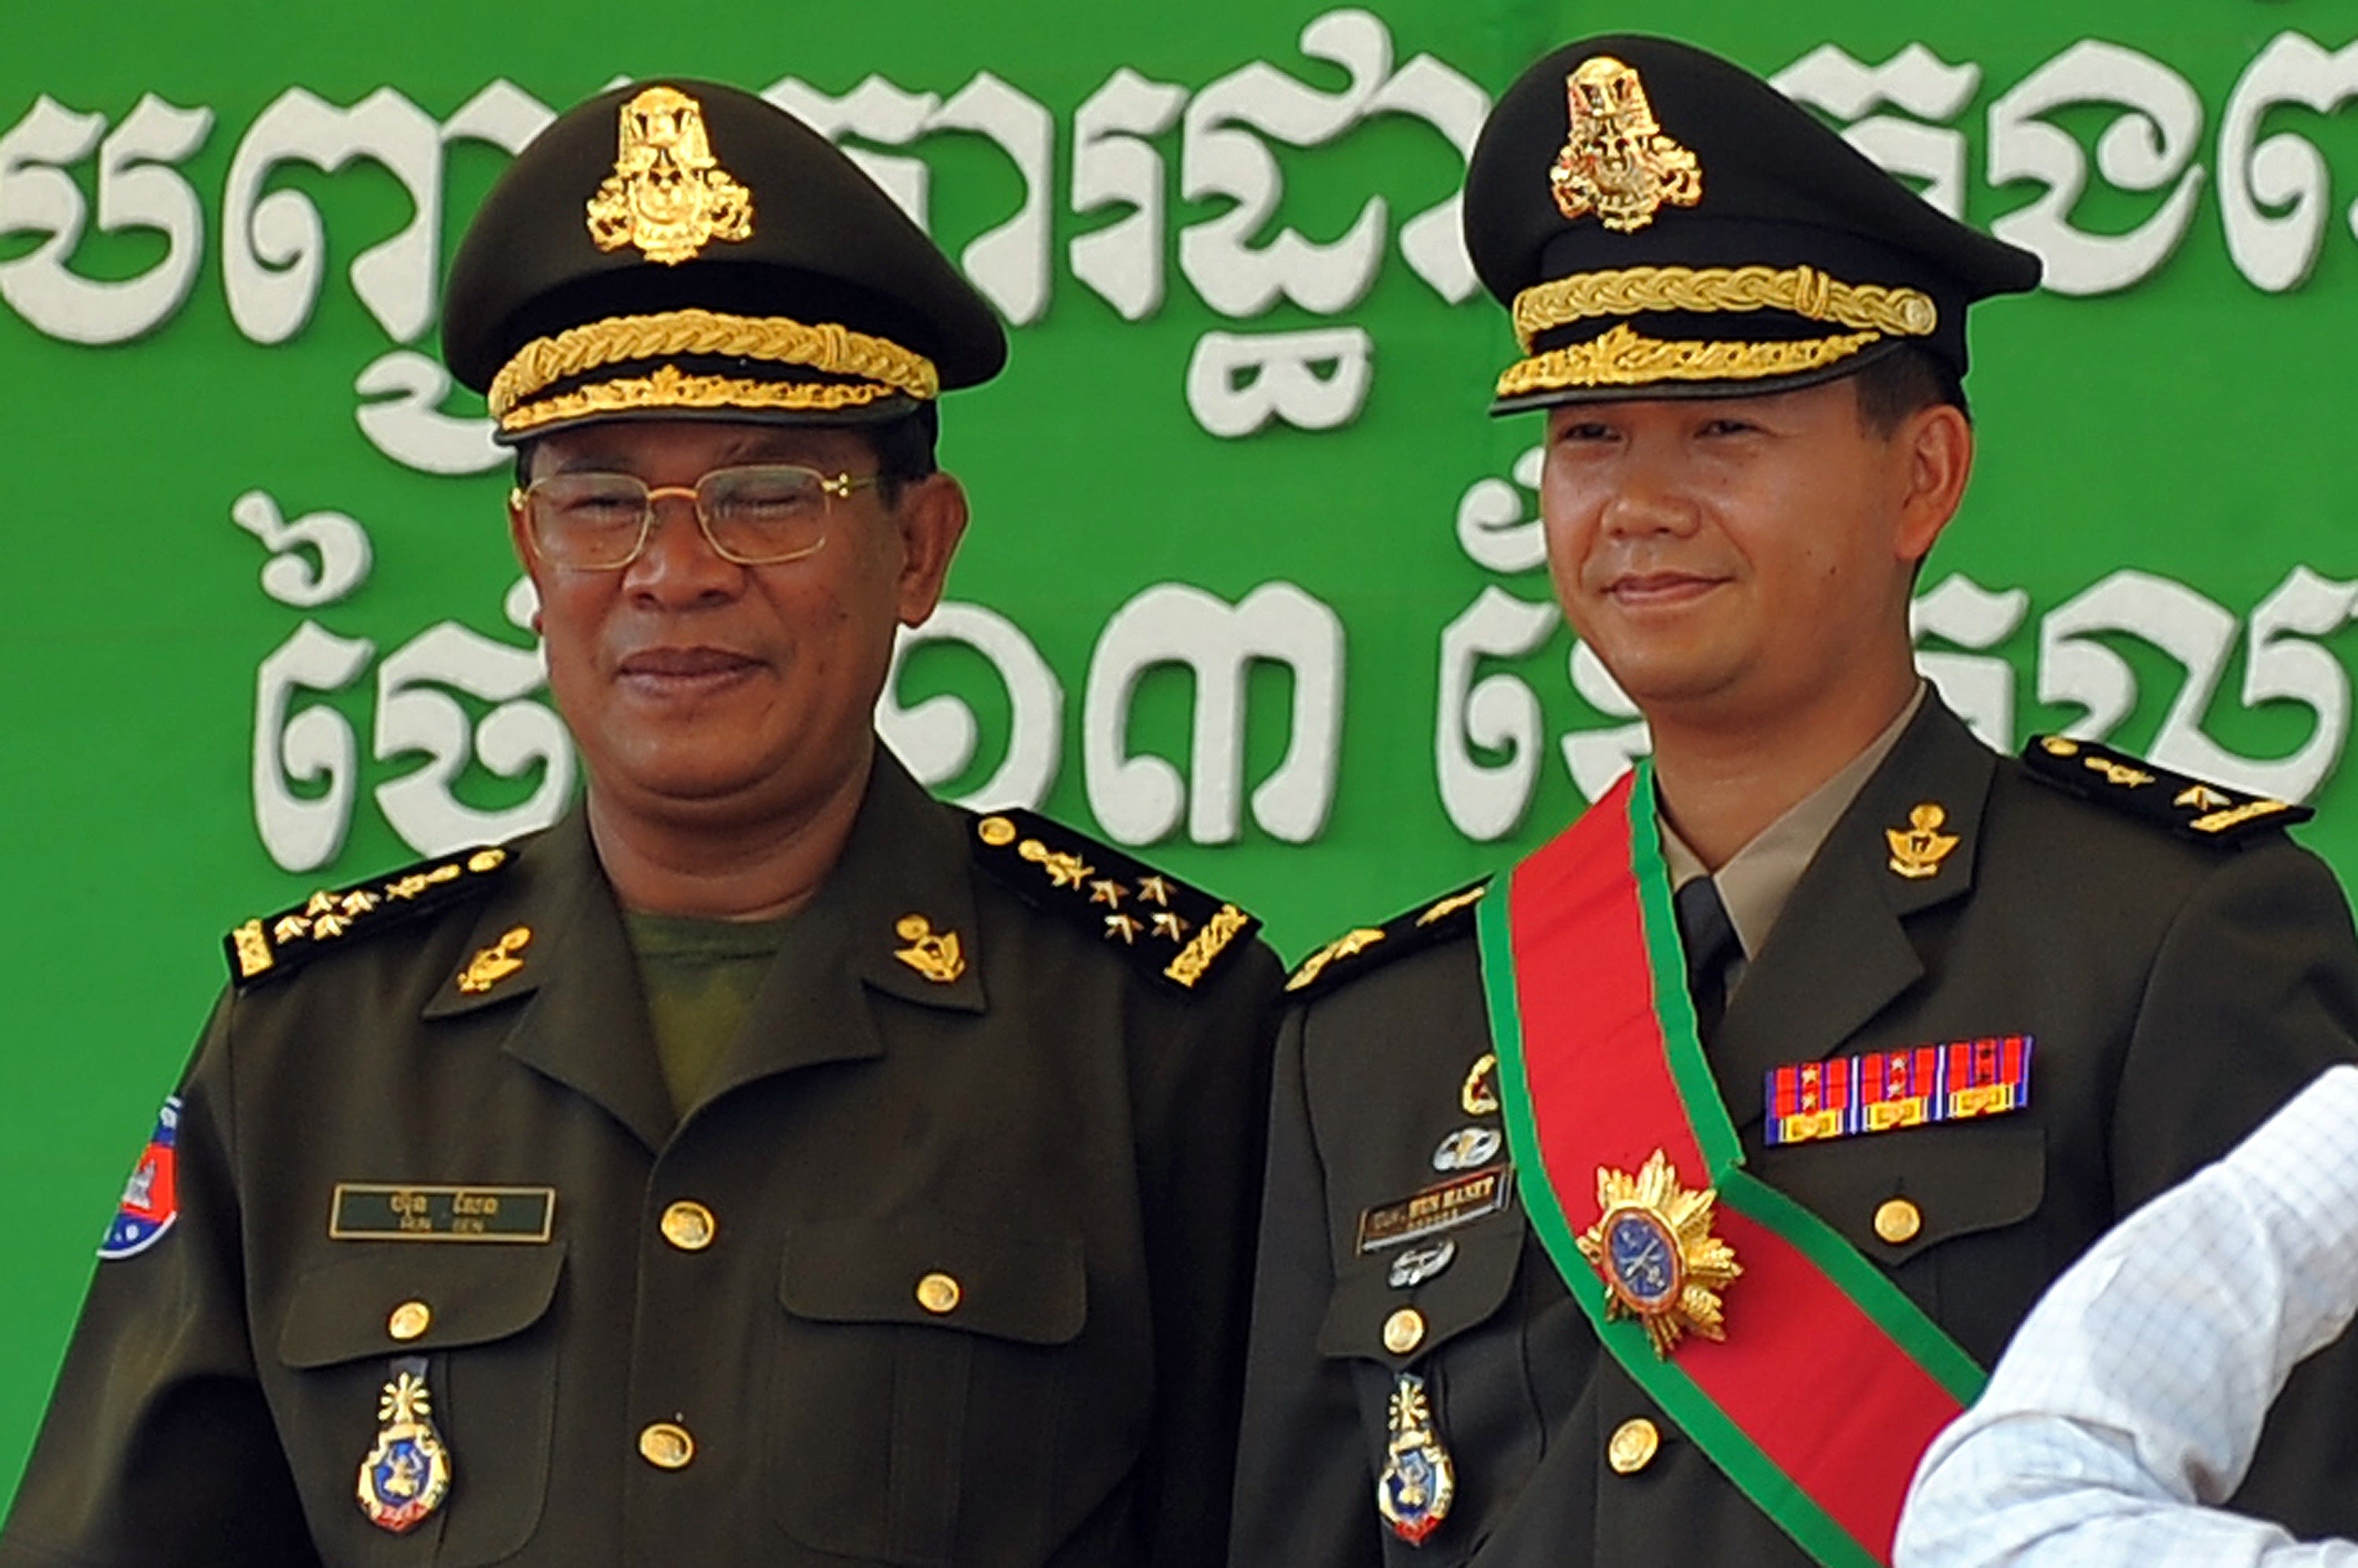 File: Cambodian prime minister Hun Sen (L) poses with his son Hun Manet (R) during a ceremony at a military base in Phnom Penh